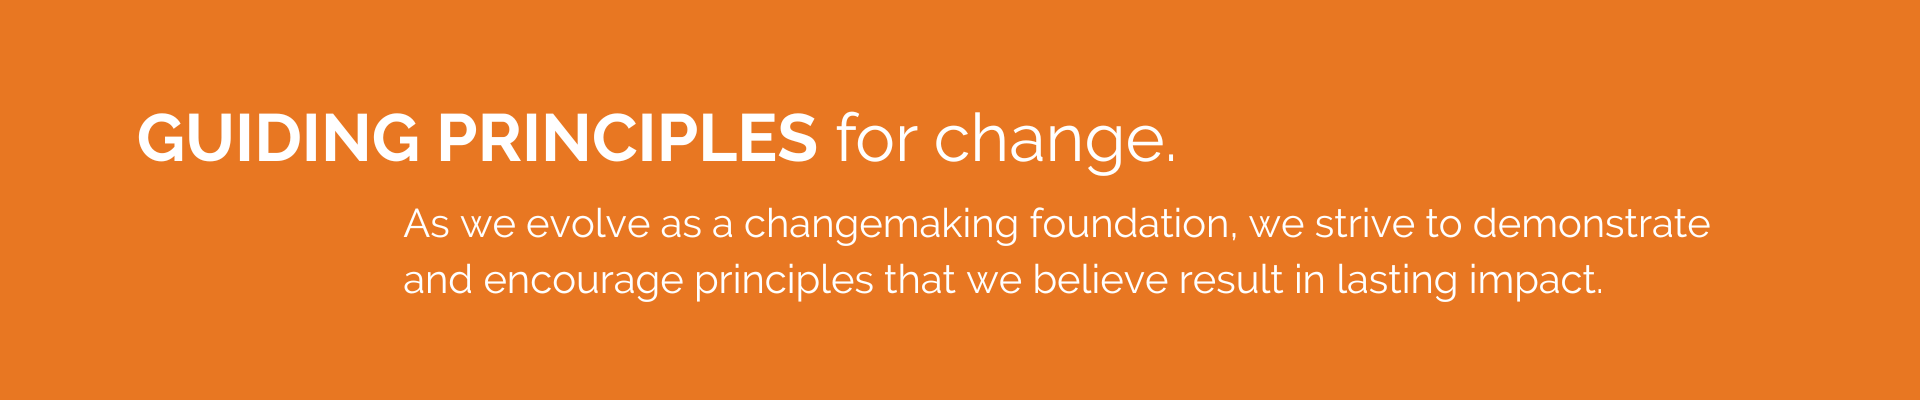 Guiding Principles for change. As we evolve as a changemaking foundation, we strive to demonstrate and encourage principles that we believe result in lasting impact. 